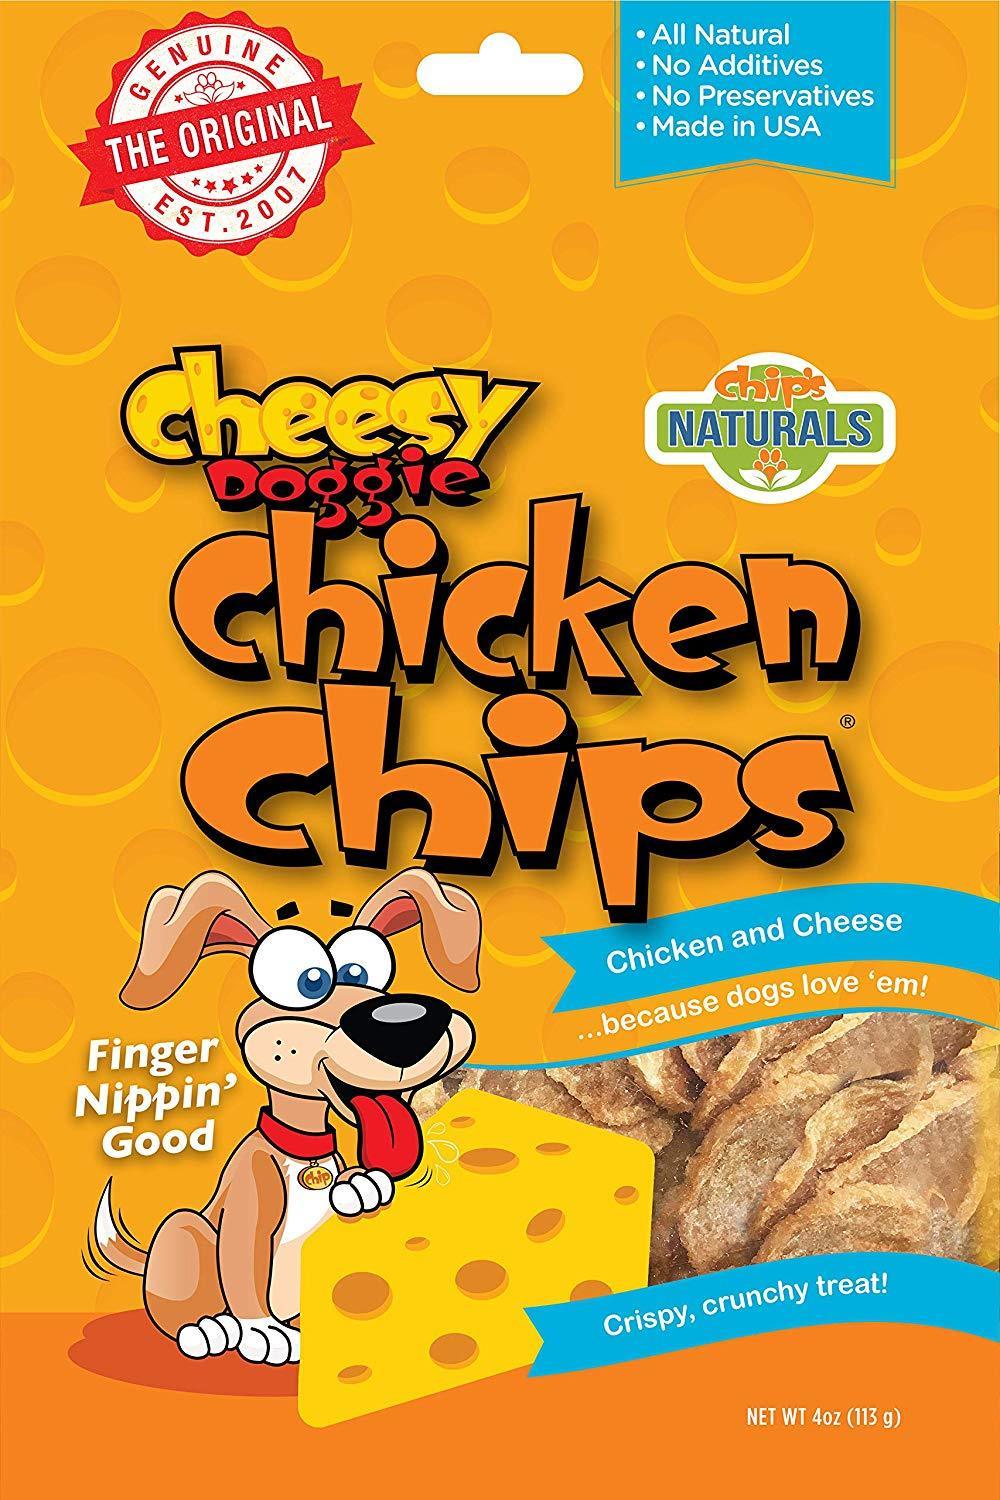 Chip's Naturals Cheesy Doggie Chicken Chips Treats for Dogs, 4 oz